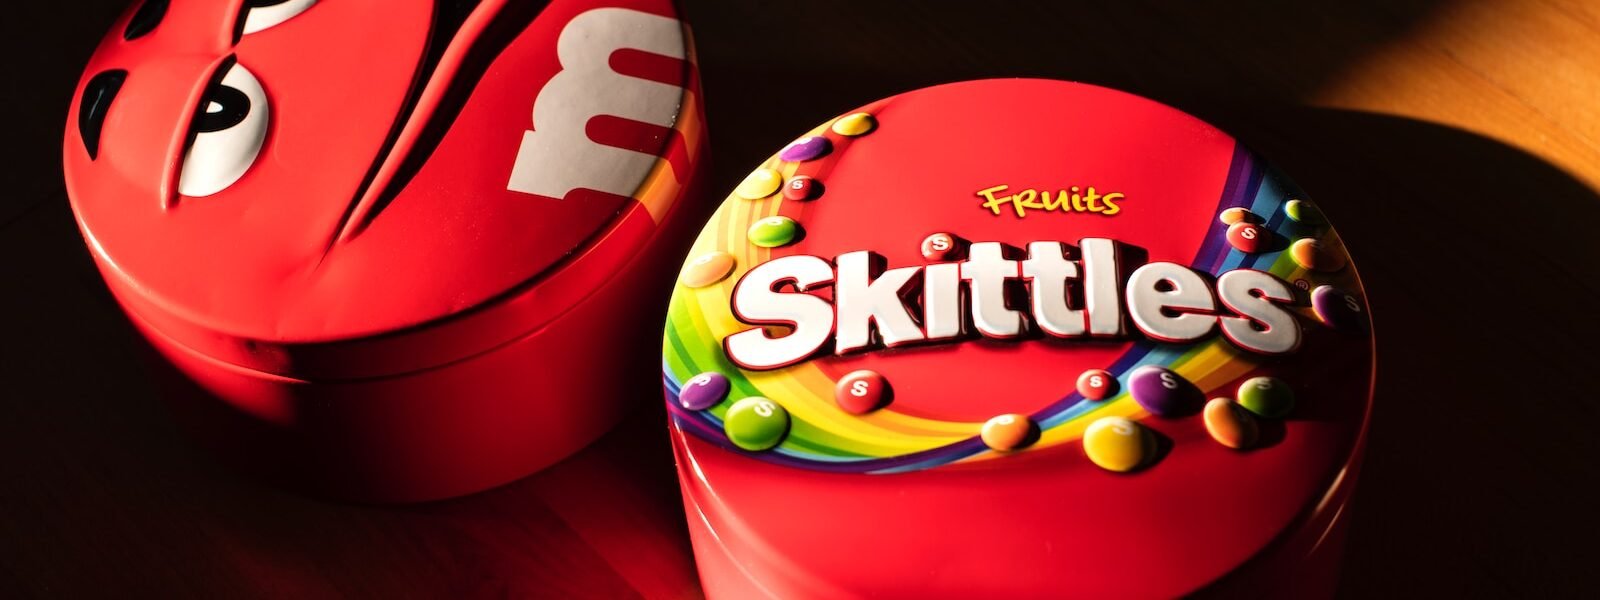 Skittles fruits can on floor